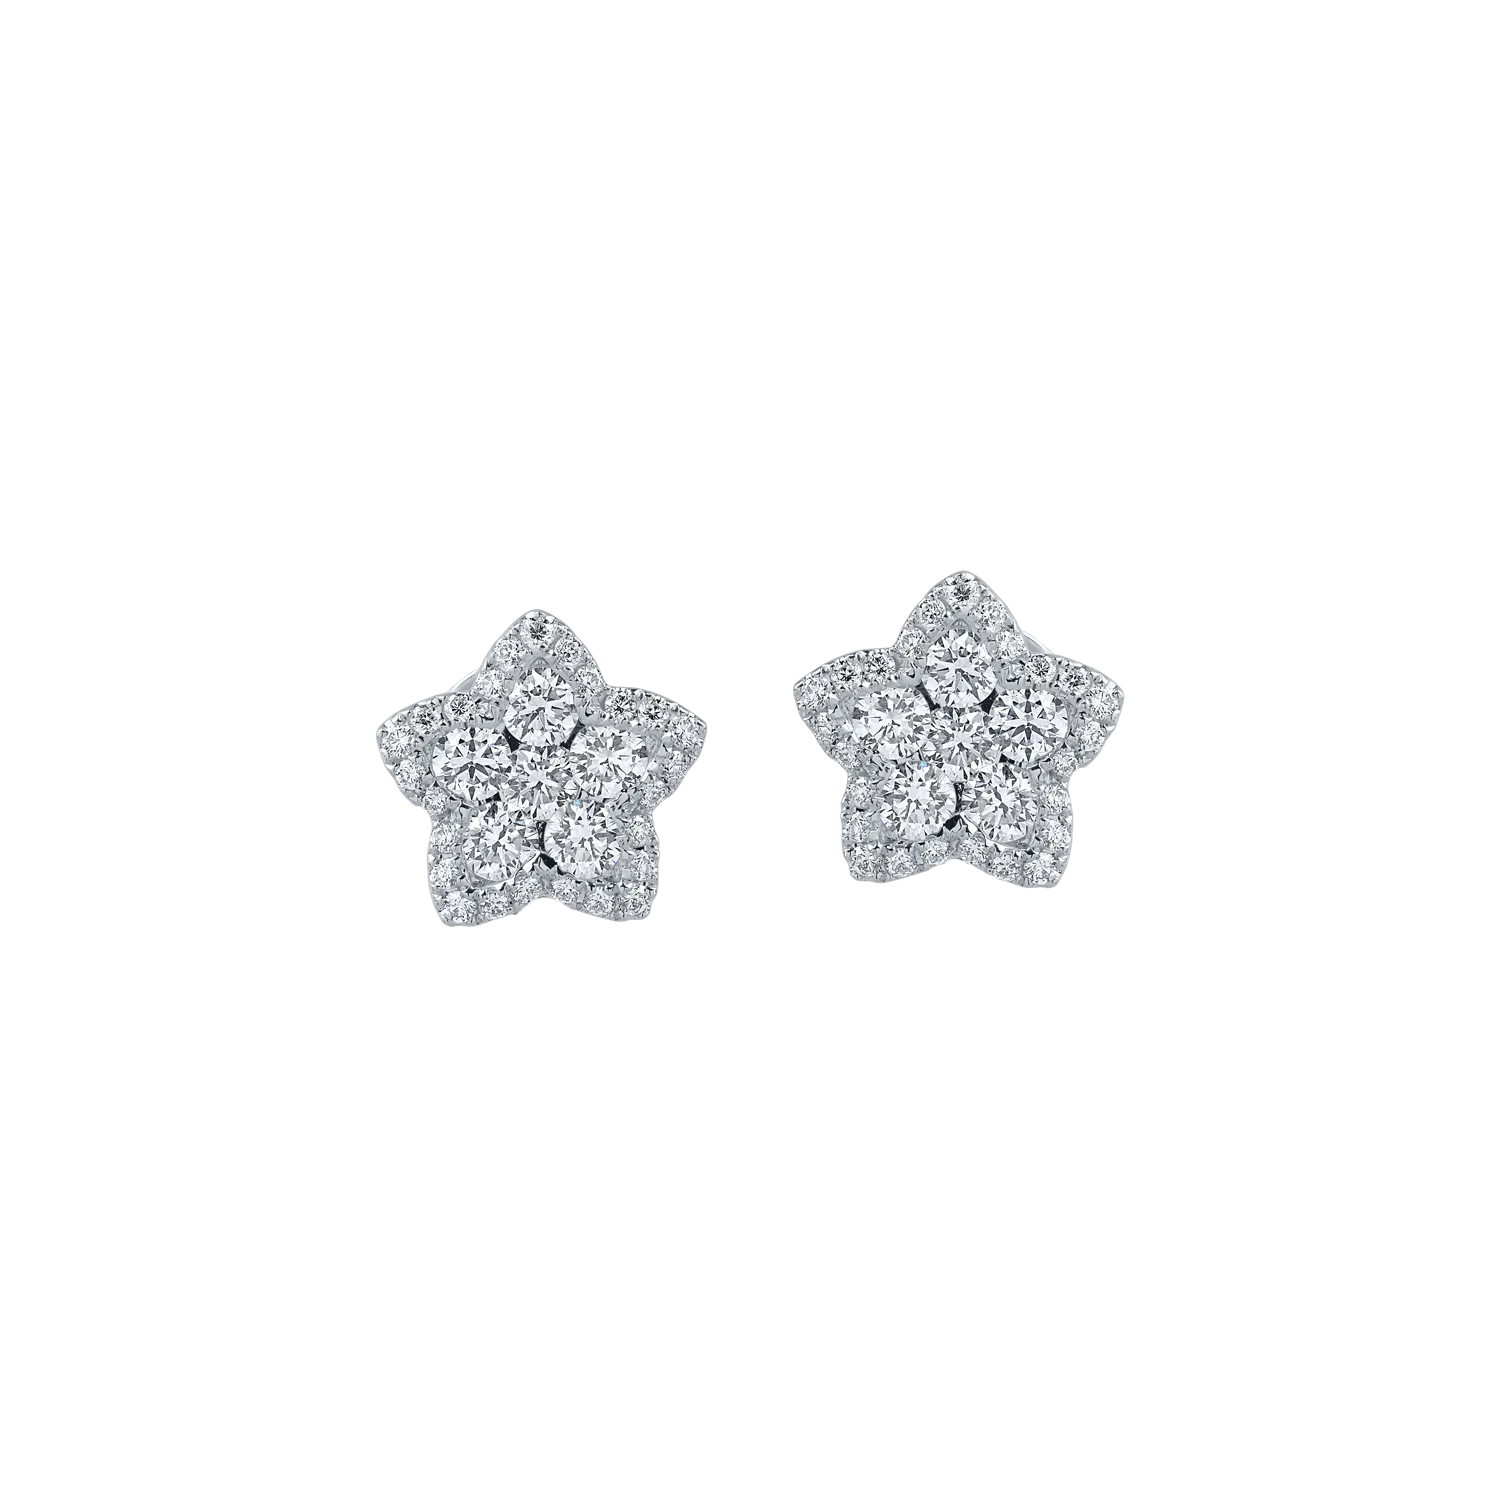 White gold star earrings with 1.661ct diamonds